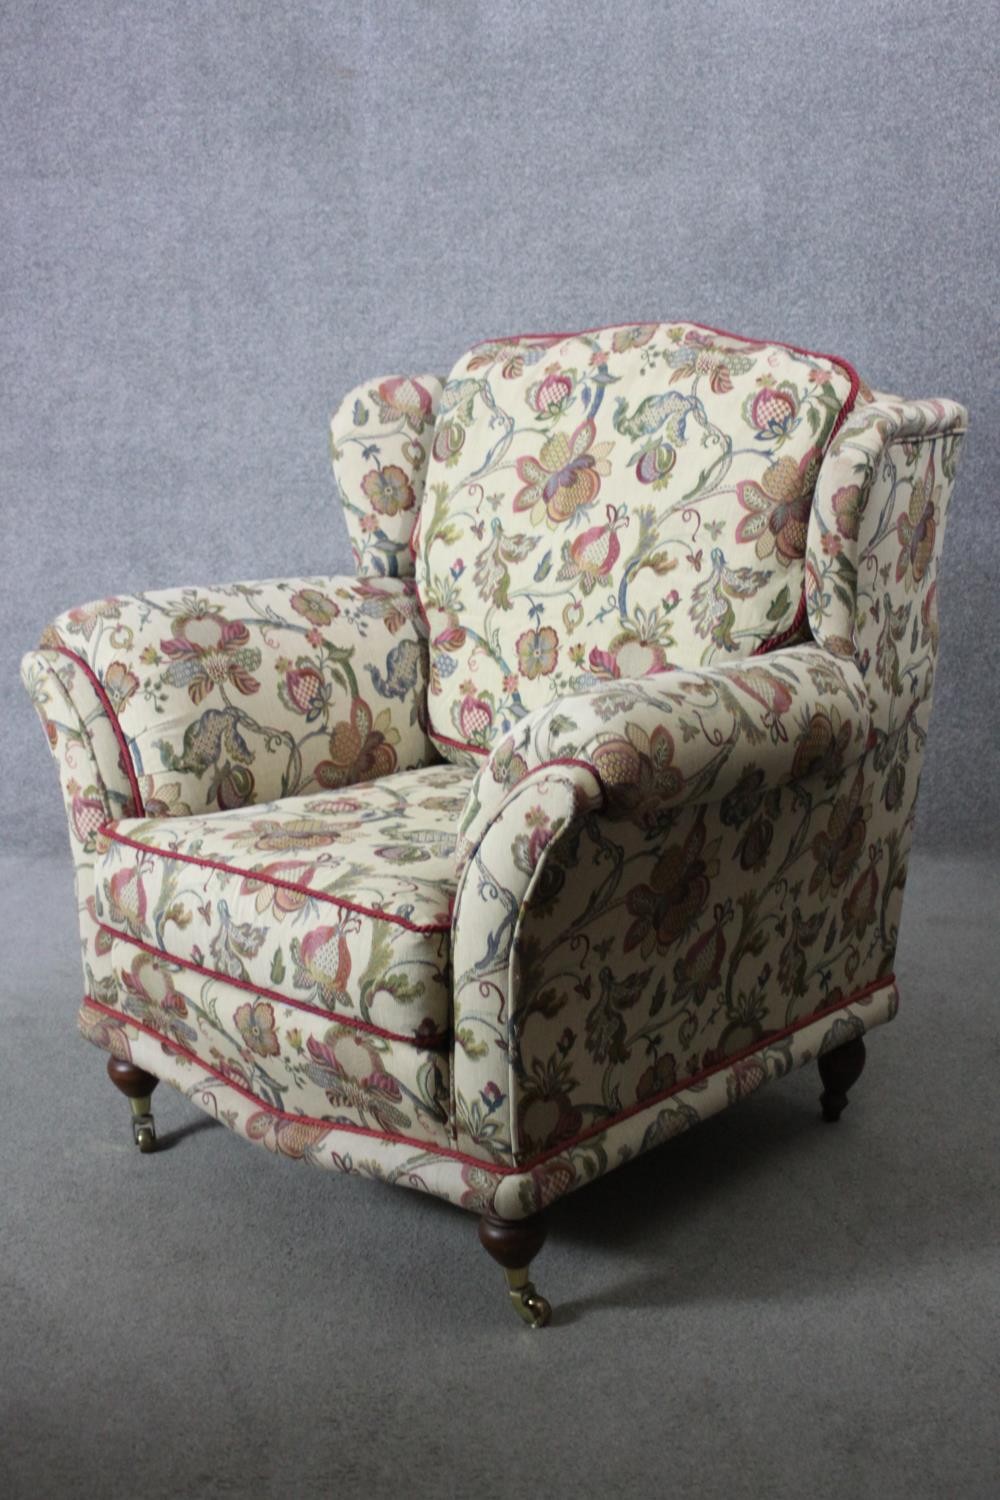 A 19th century armchair in floral tapestry style upholstery on turned mahogany supports - Image 2 of 5